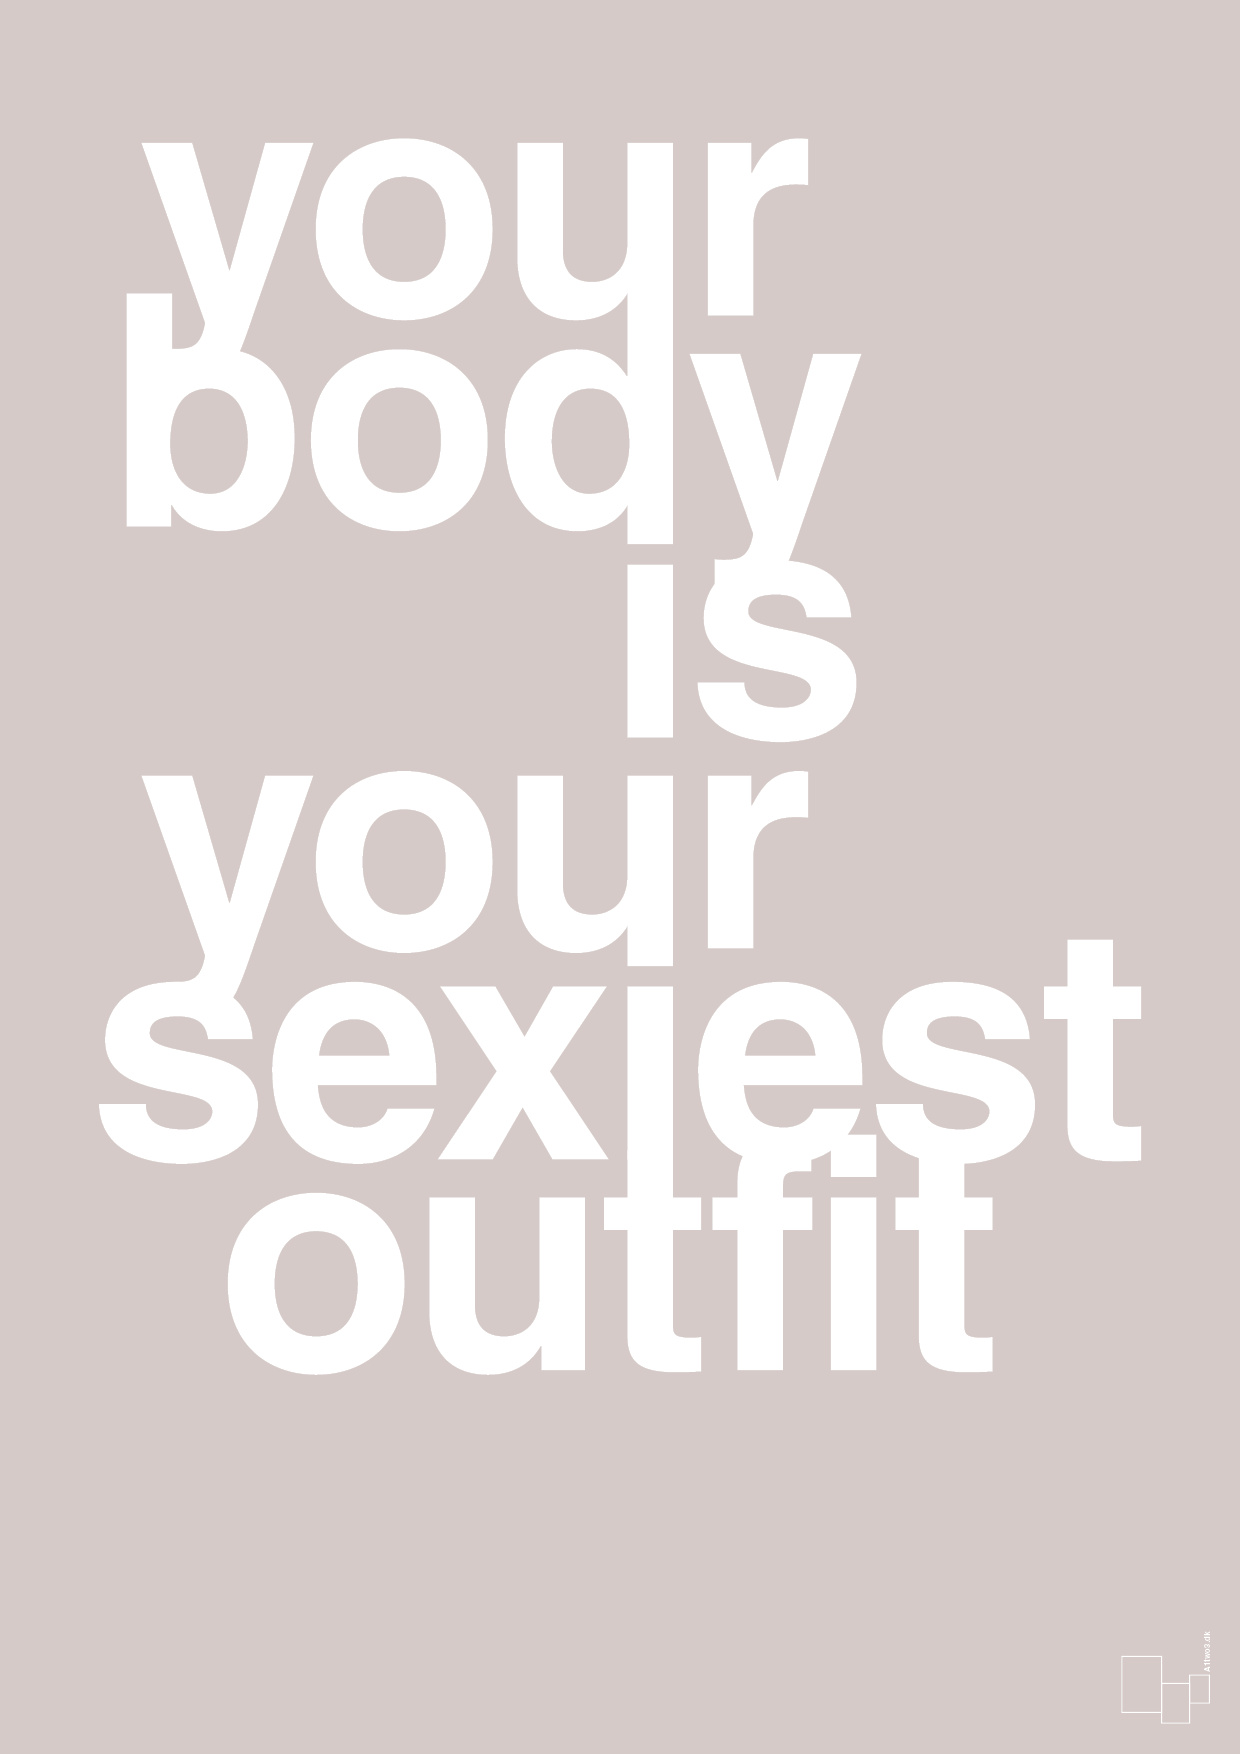 your body is your sexiest outfit - Plakat med Sport & Fritid i Broken Beige